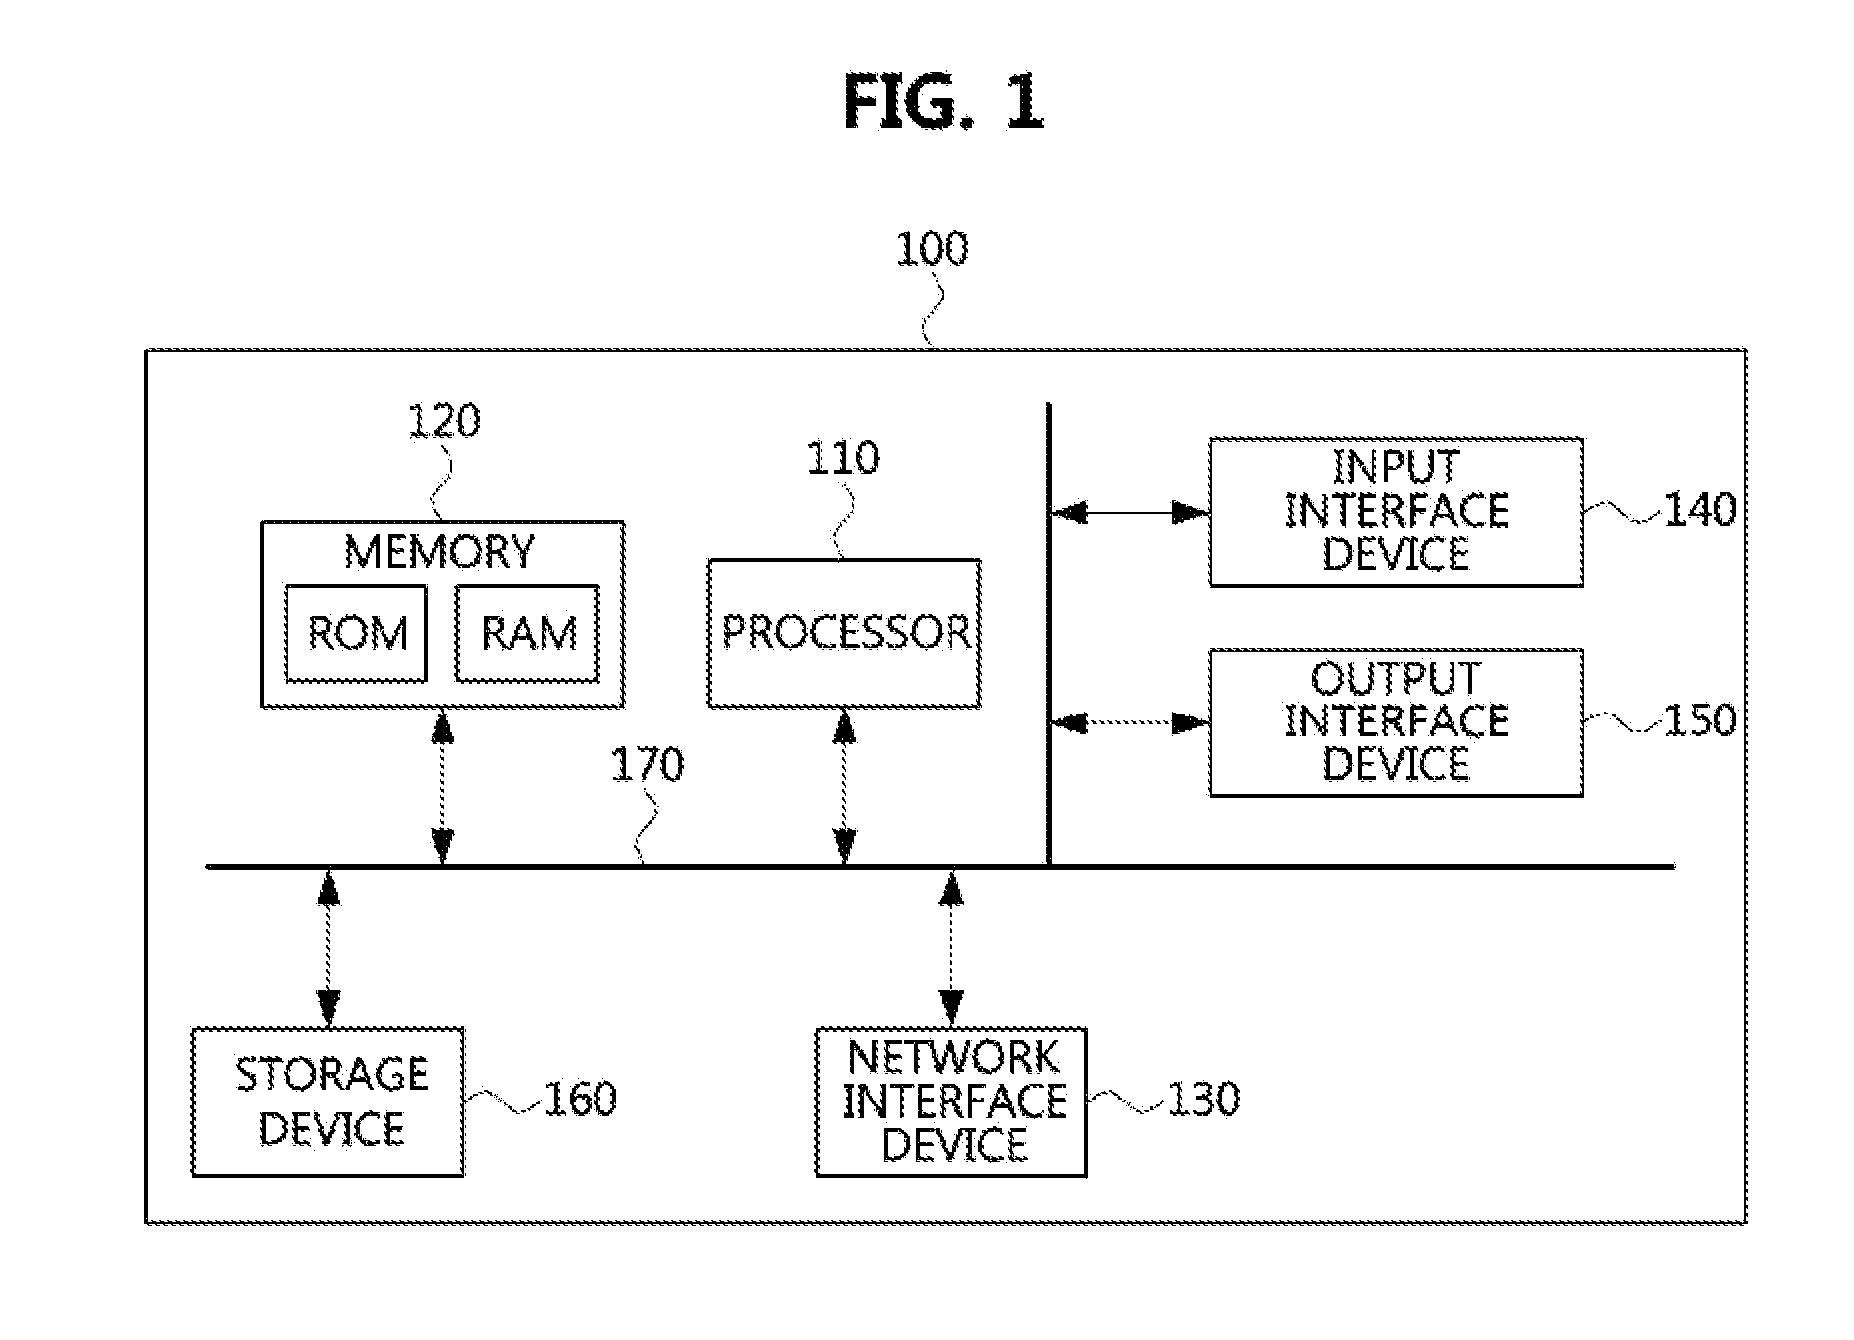 Method for discovering neighbor node in wireless local area network